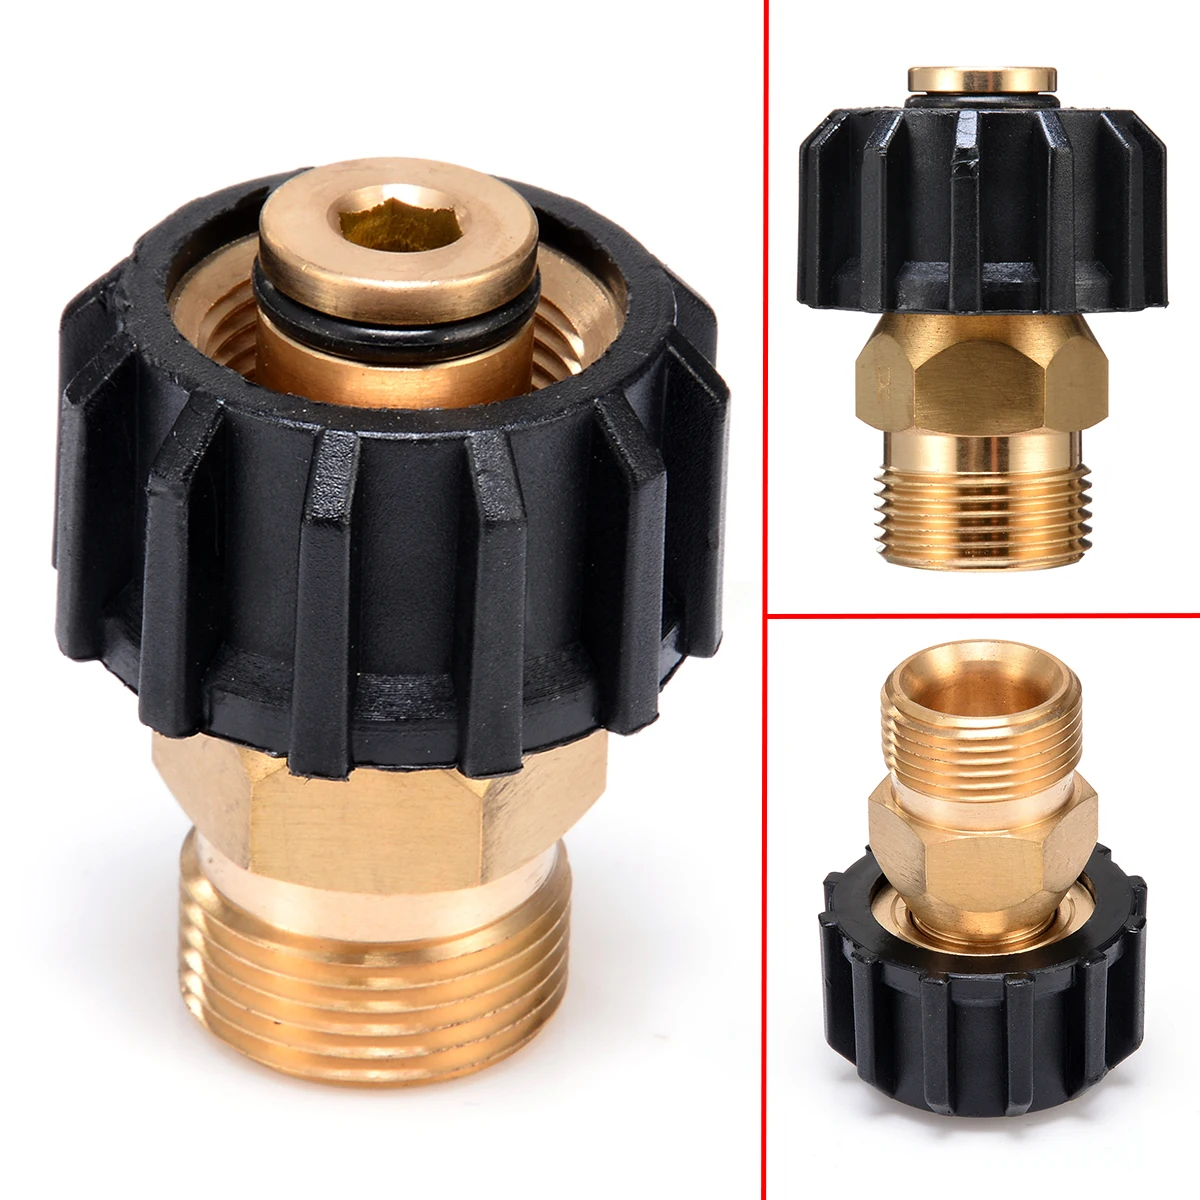 Pressure Washer Adapter Connector Female Twist M22*15mm Convert To A (Standard) Male M22*14mm Adapter 4000 psi For Cleaning Tool